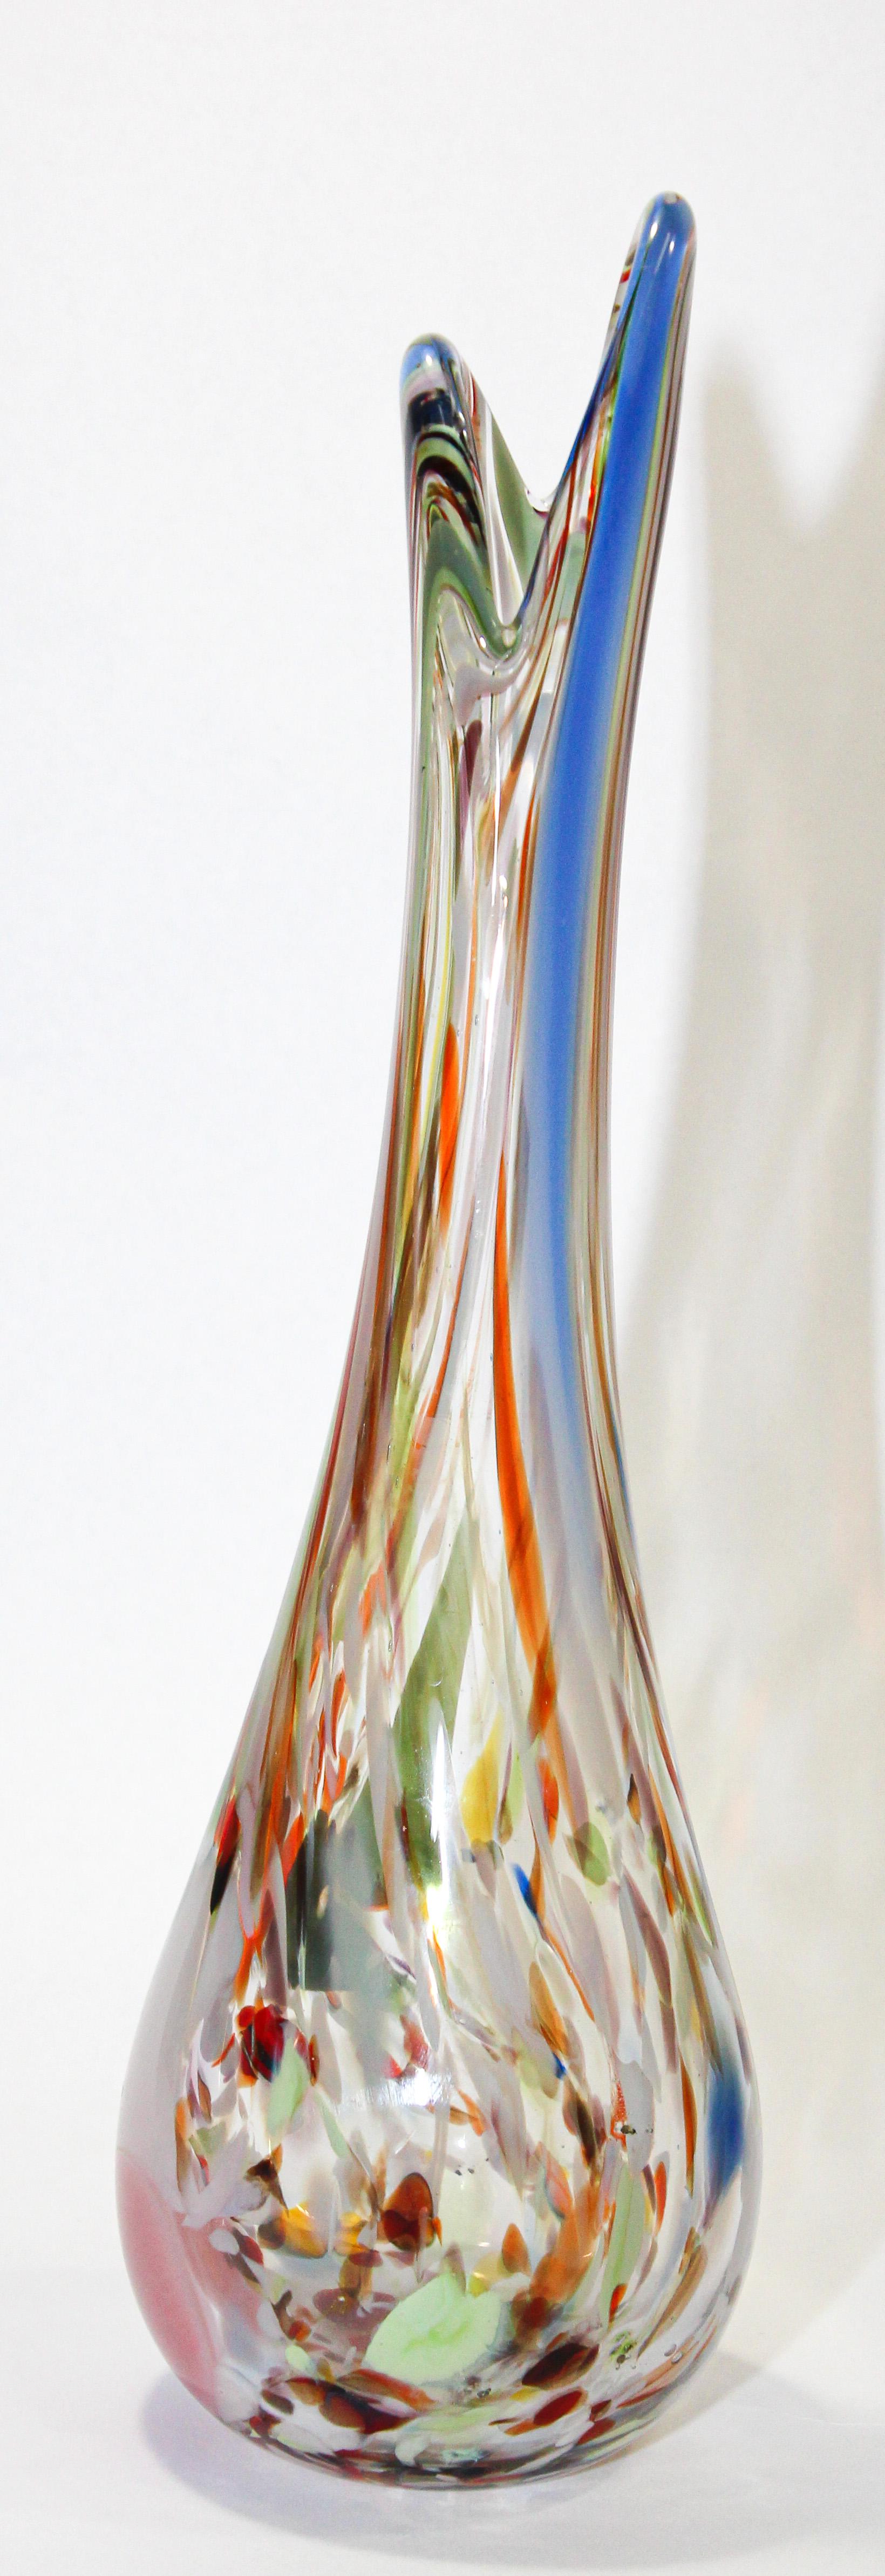 Handblown Murano Art Glass Vase Organic Shape In Good Condition For Sale In North Hollywood, CA